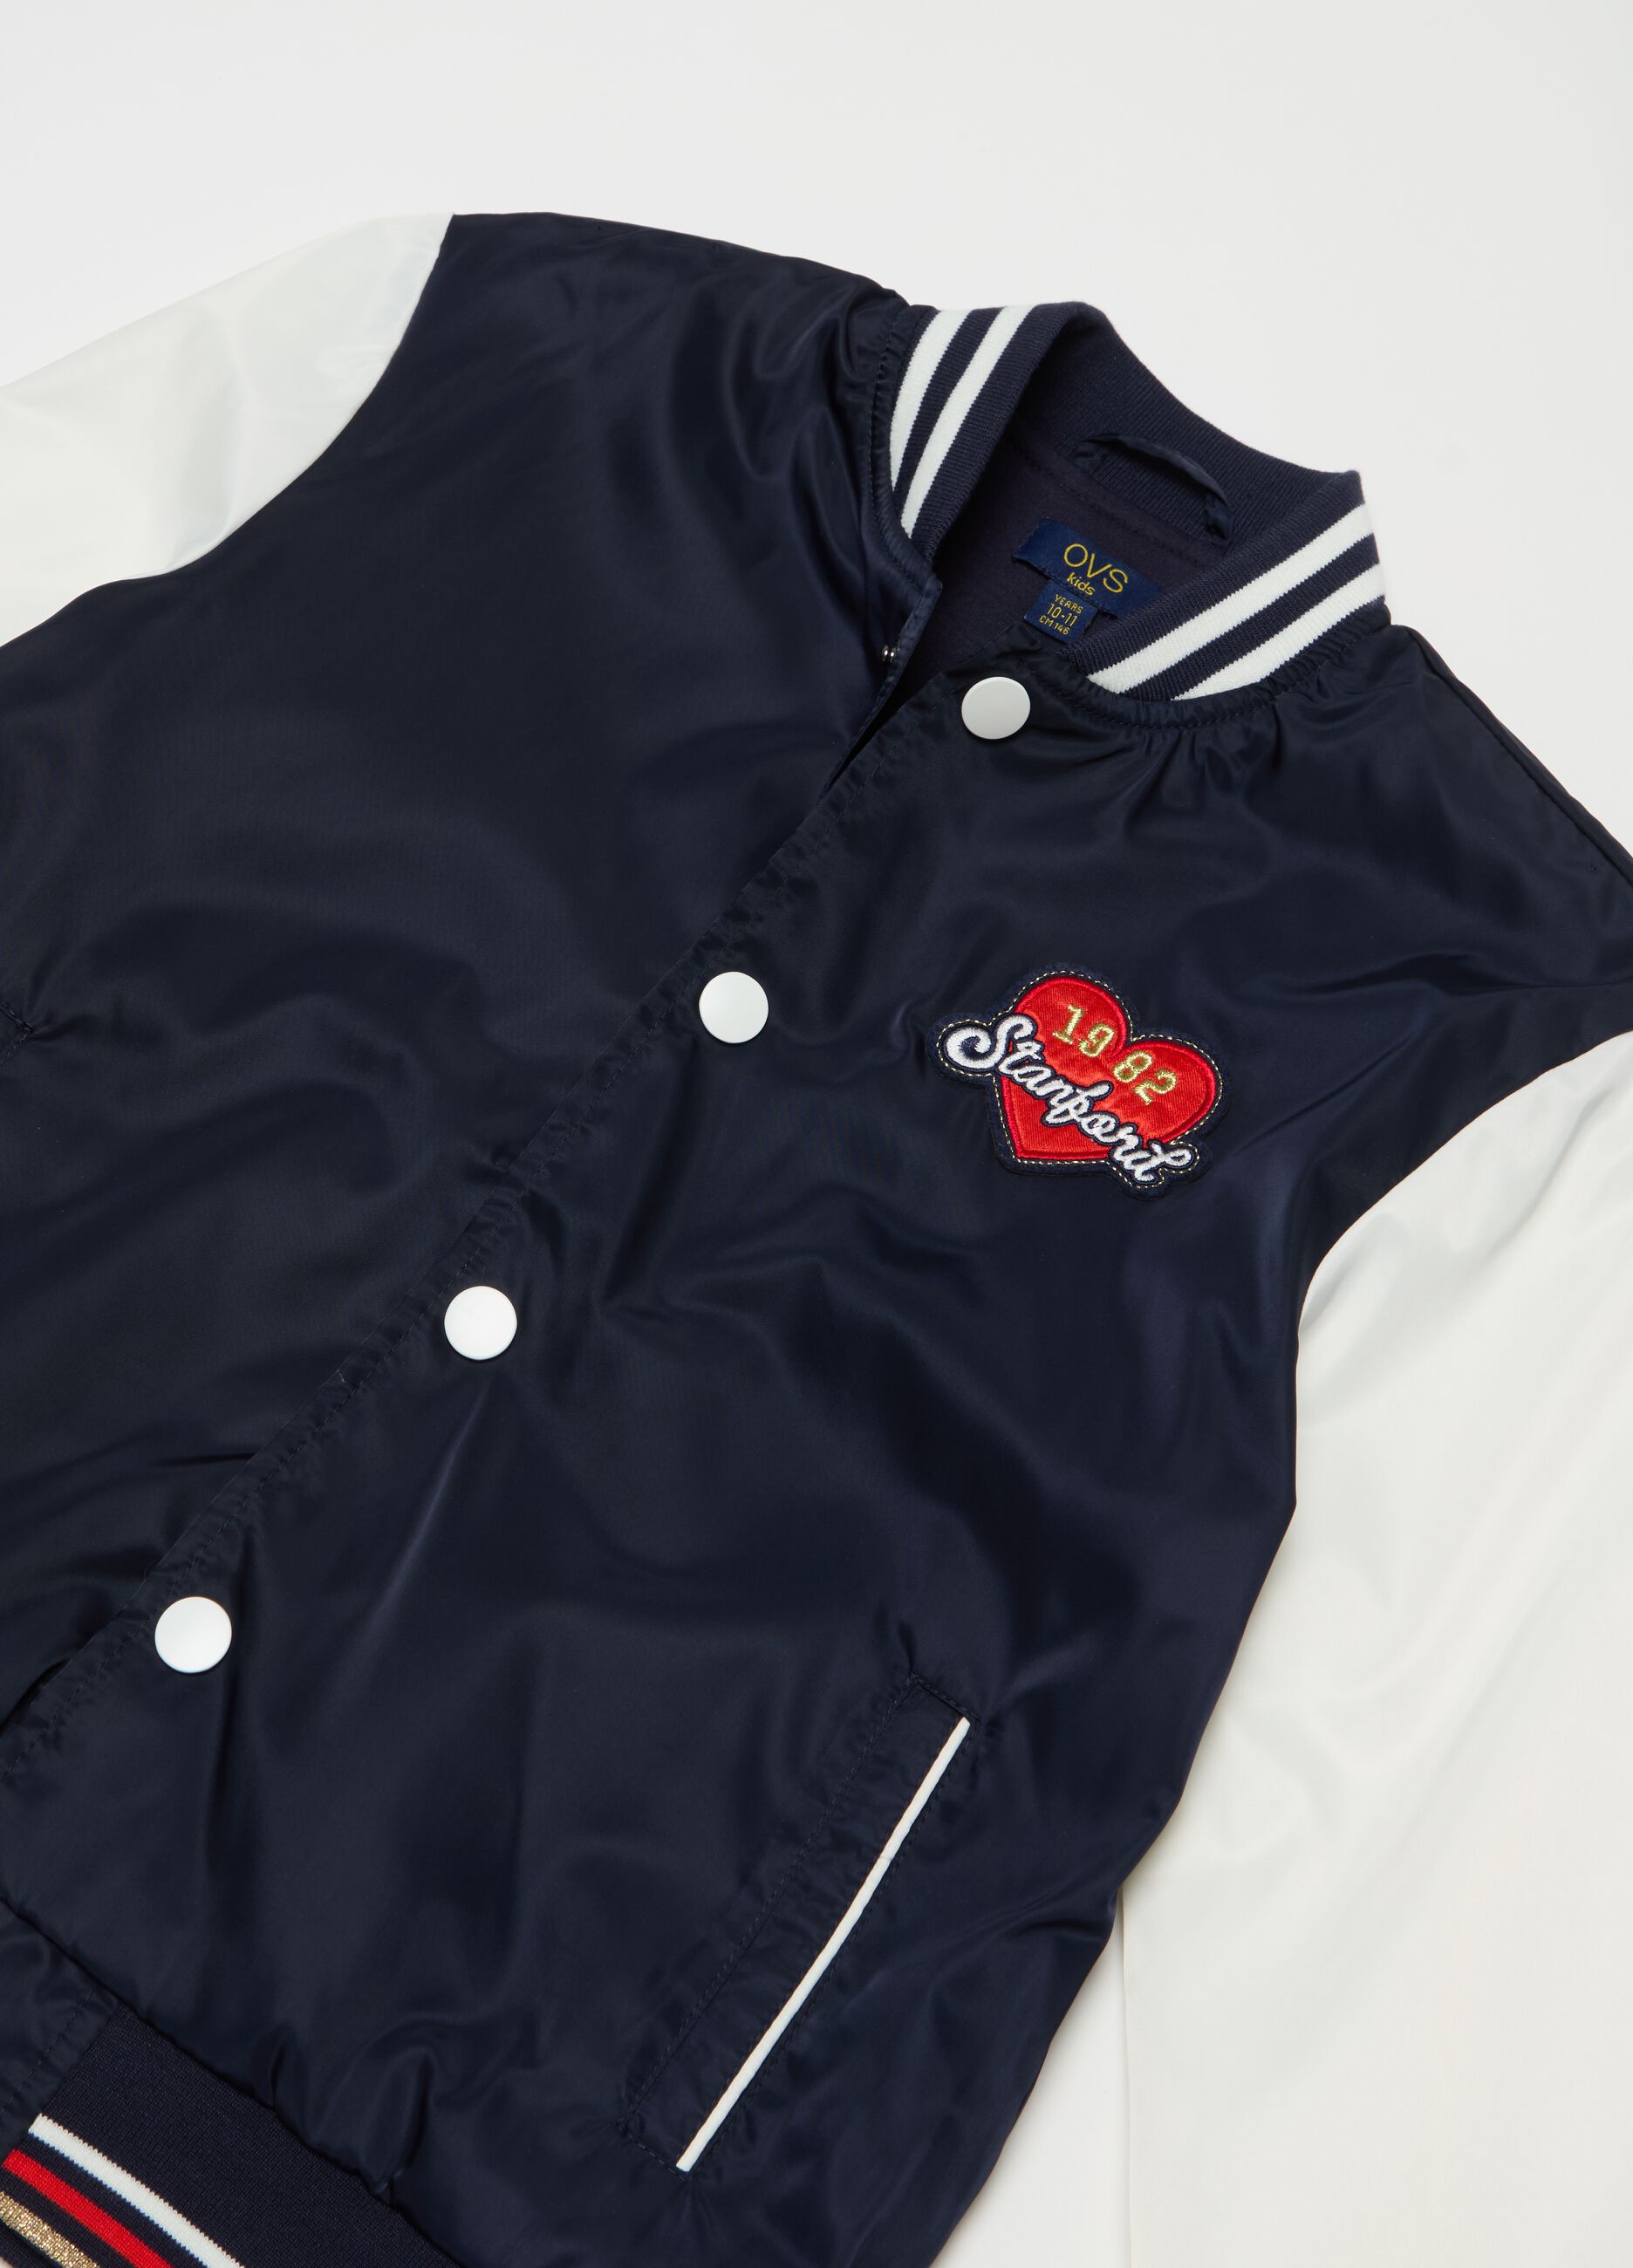 Varsity bomber jacket with lettering embroidery